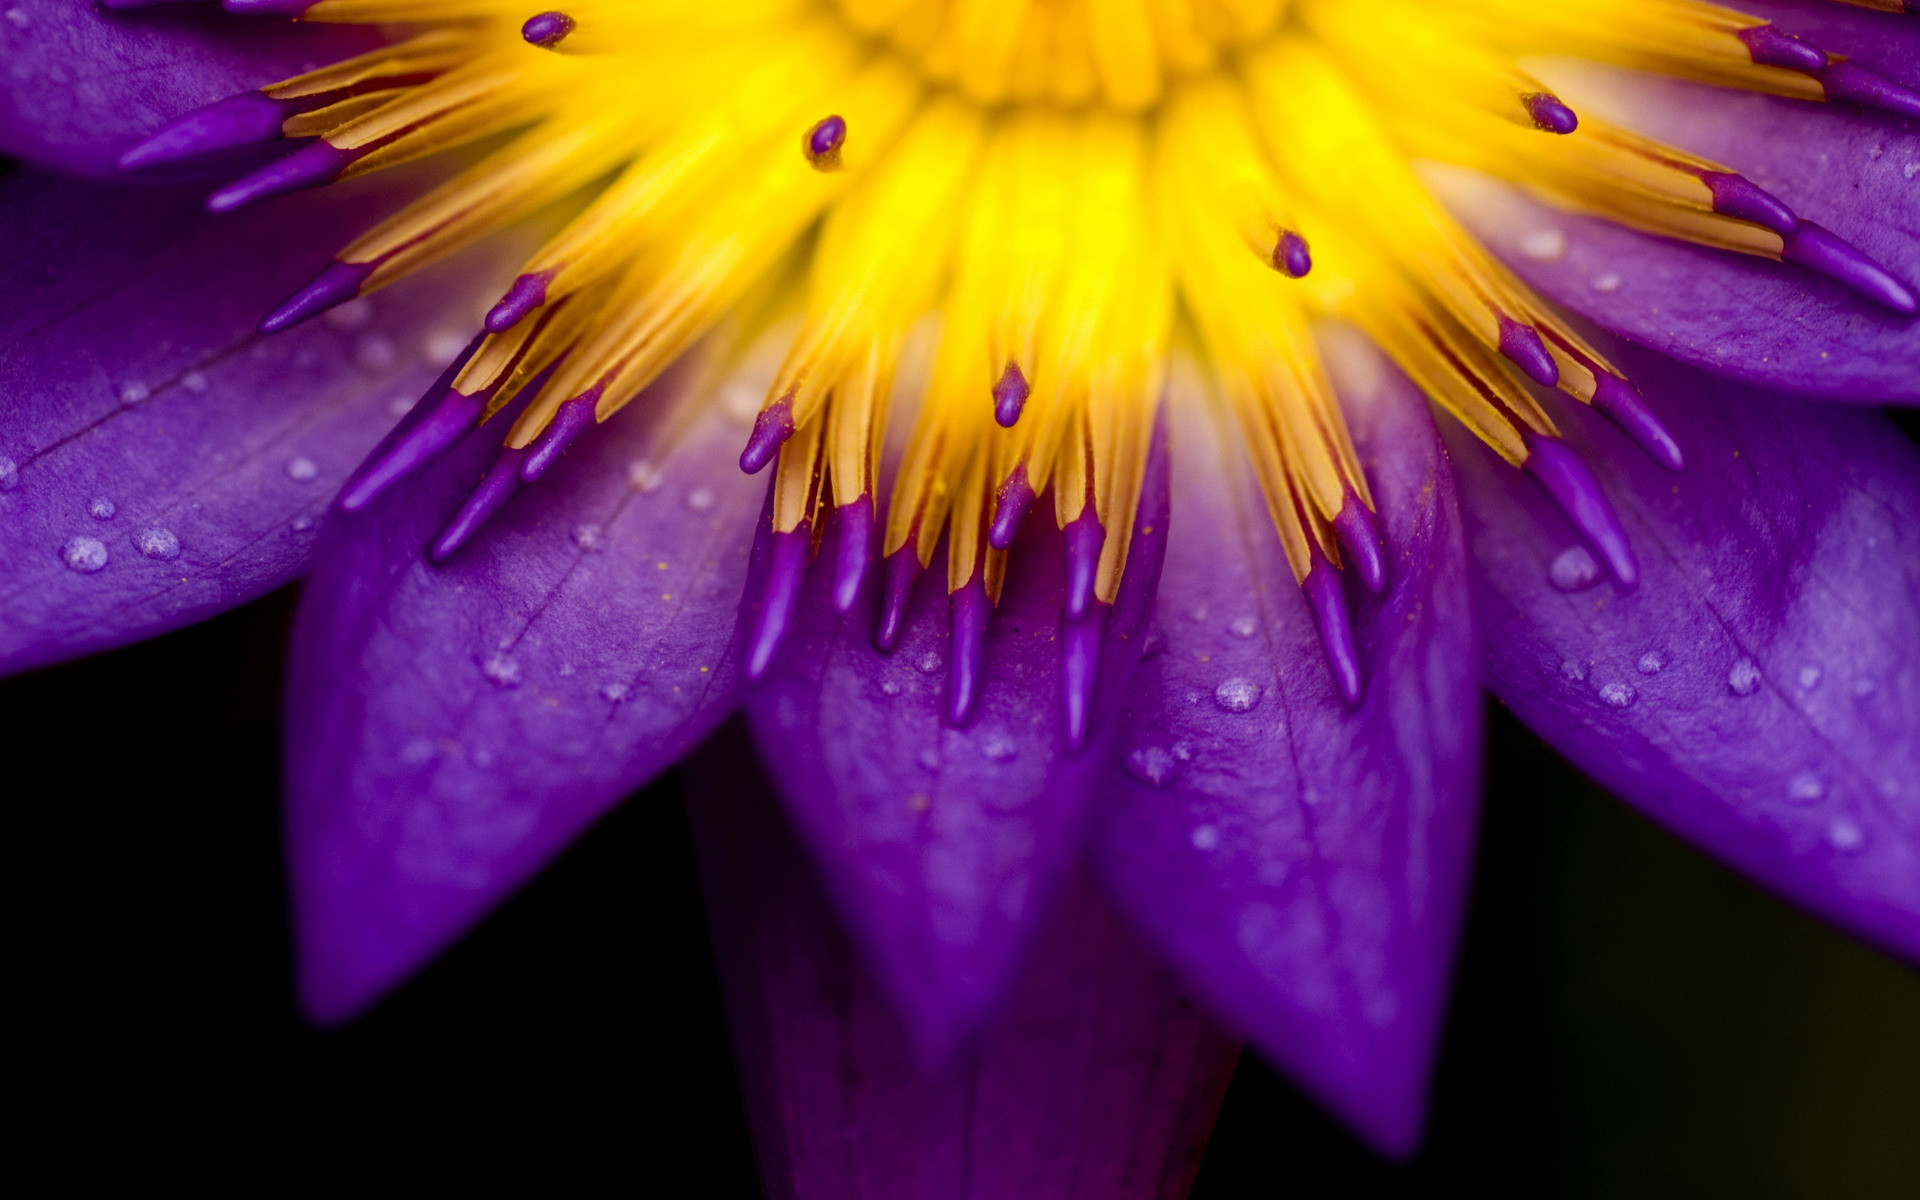 Yellow and purple petals of flower - Bright flower